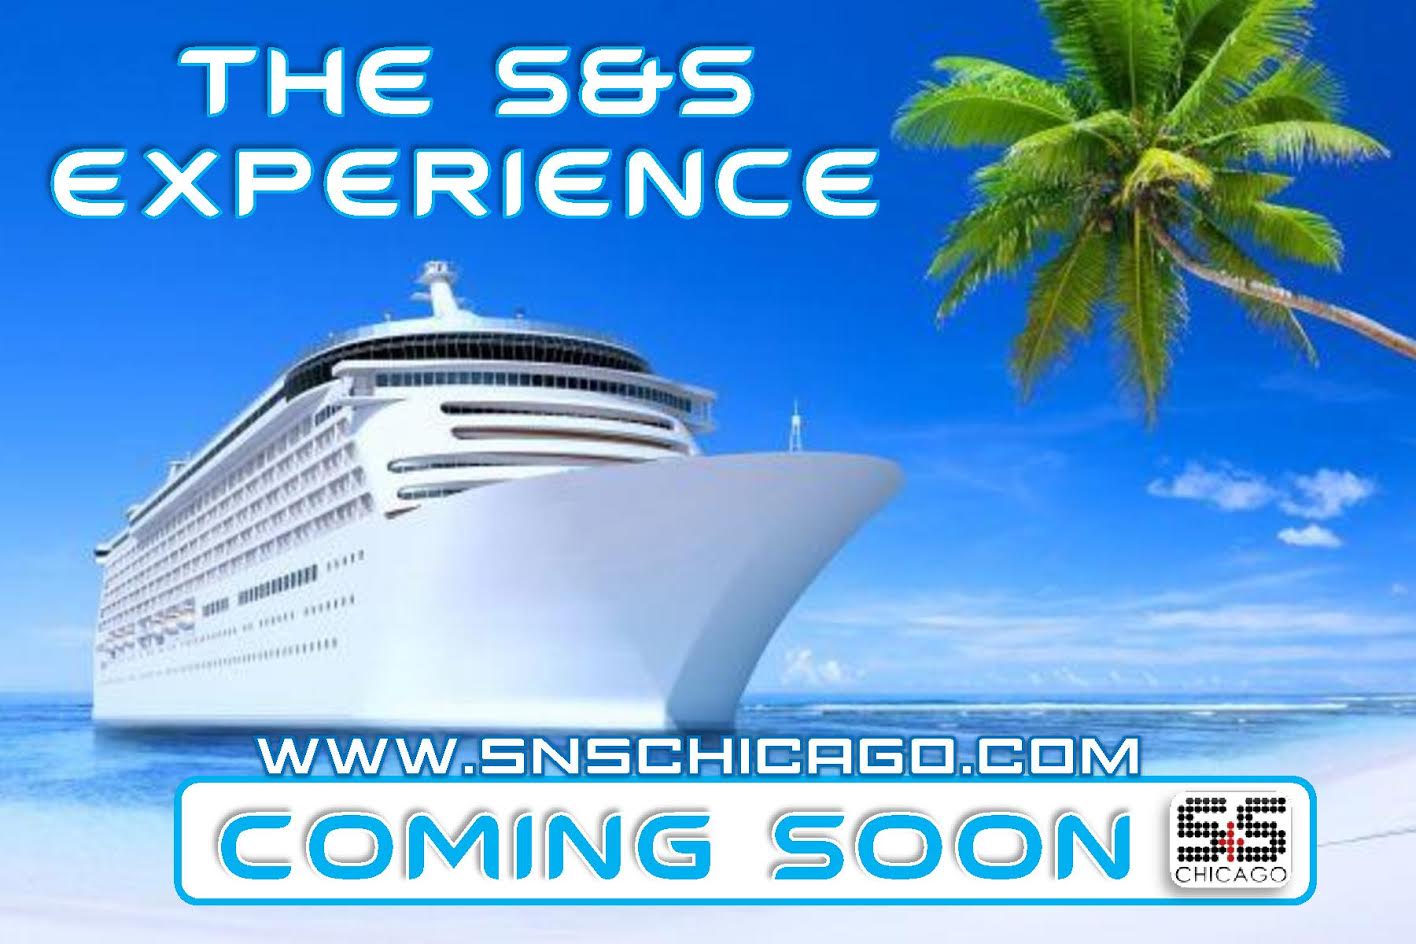 The S&S Experience at Sea Interest Survey